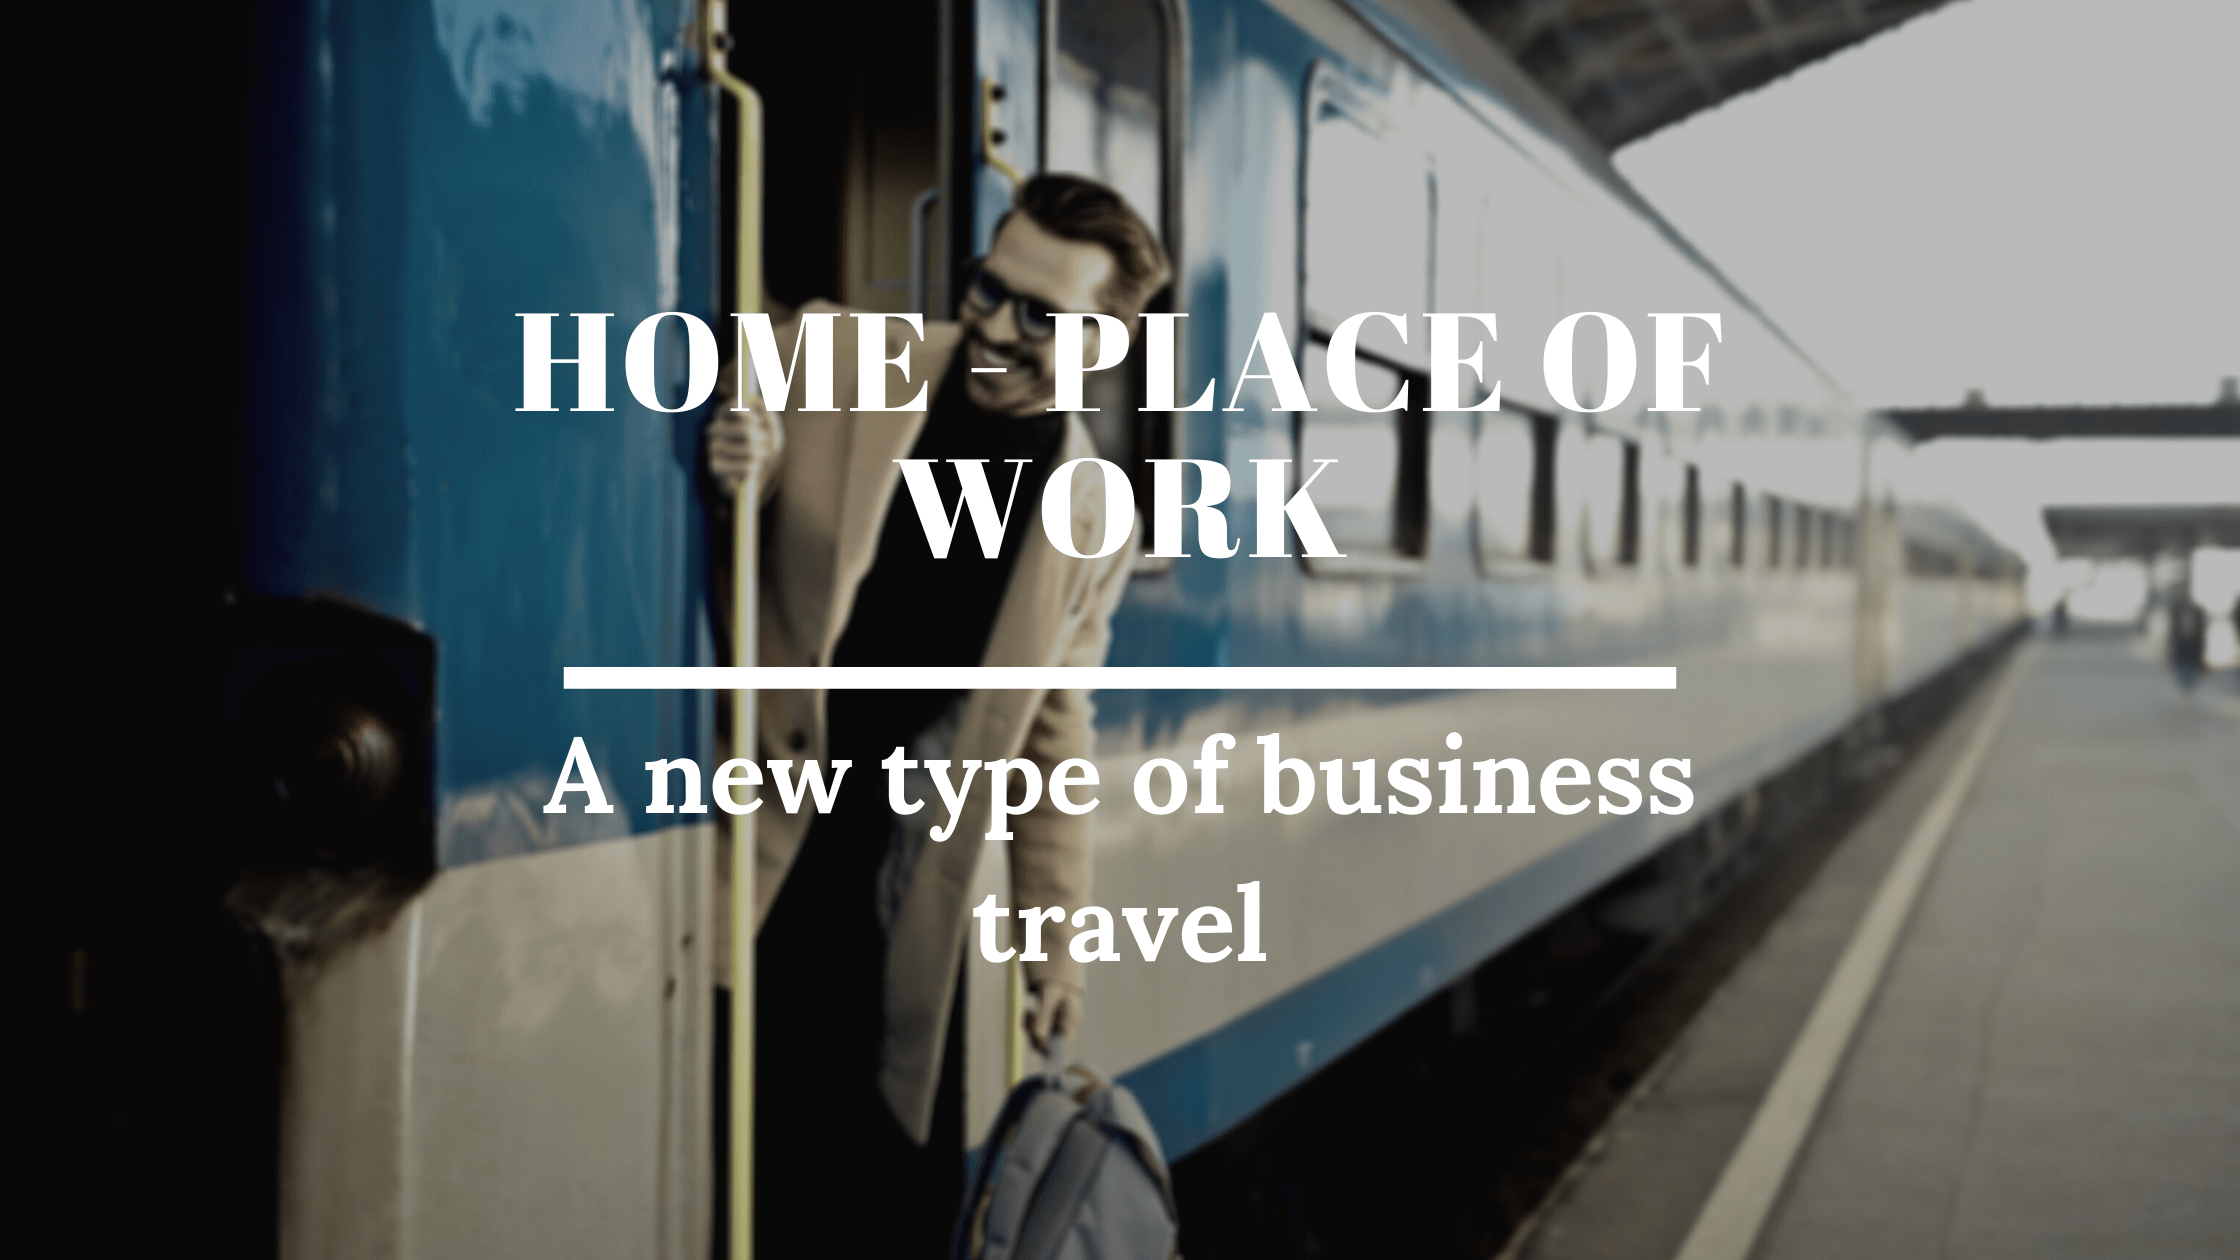 Home Place of work new type of business travel